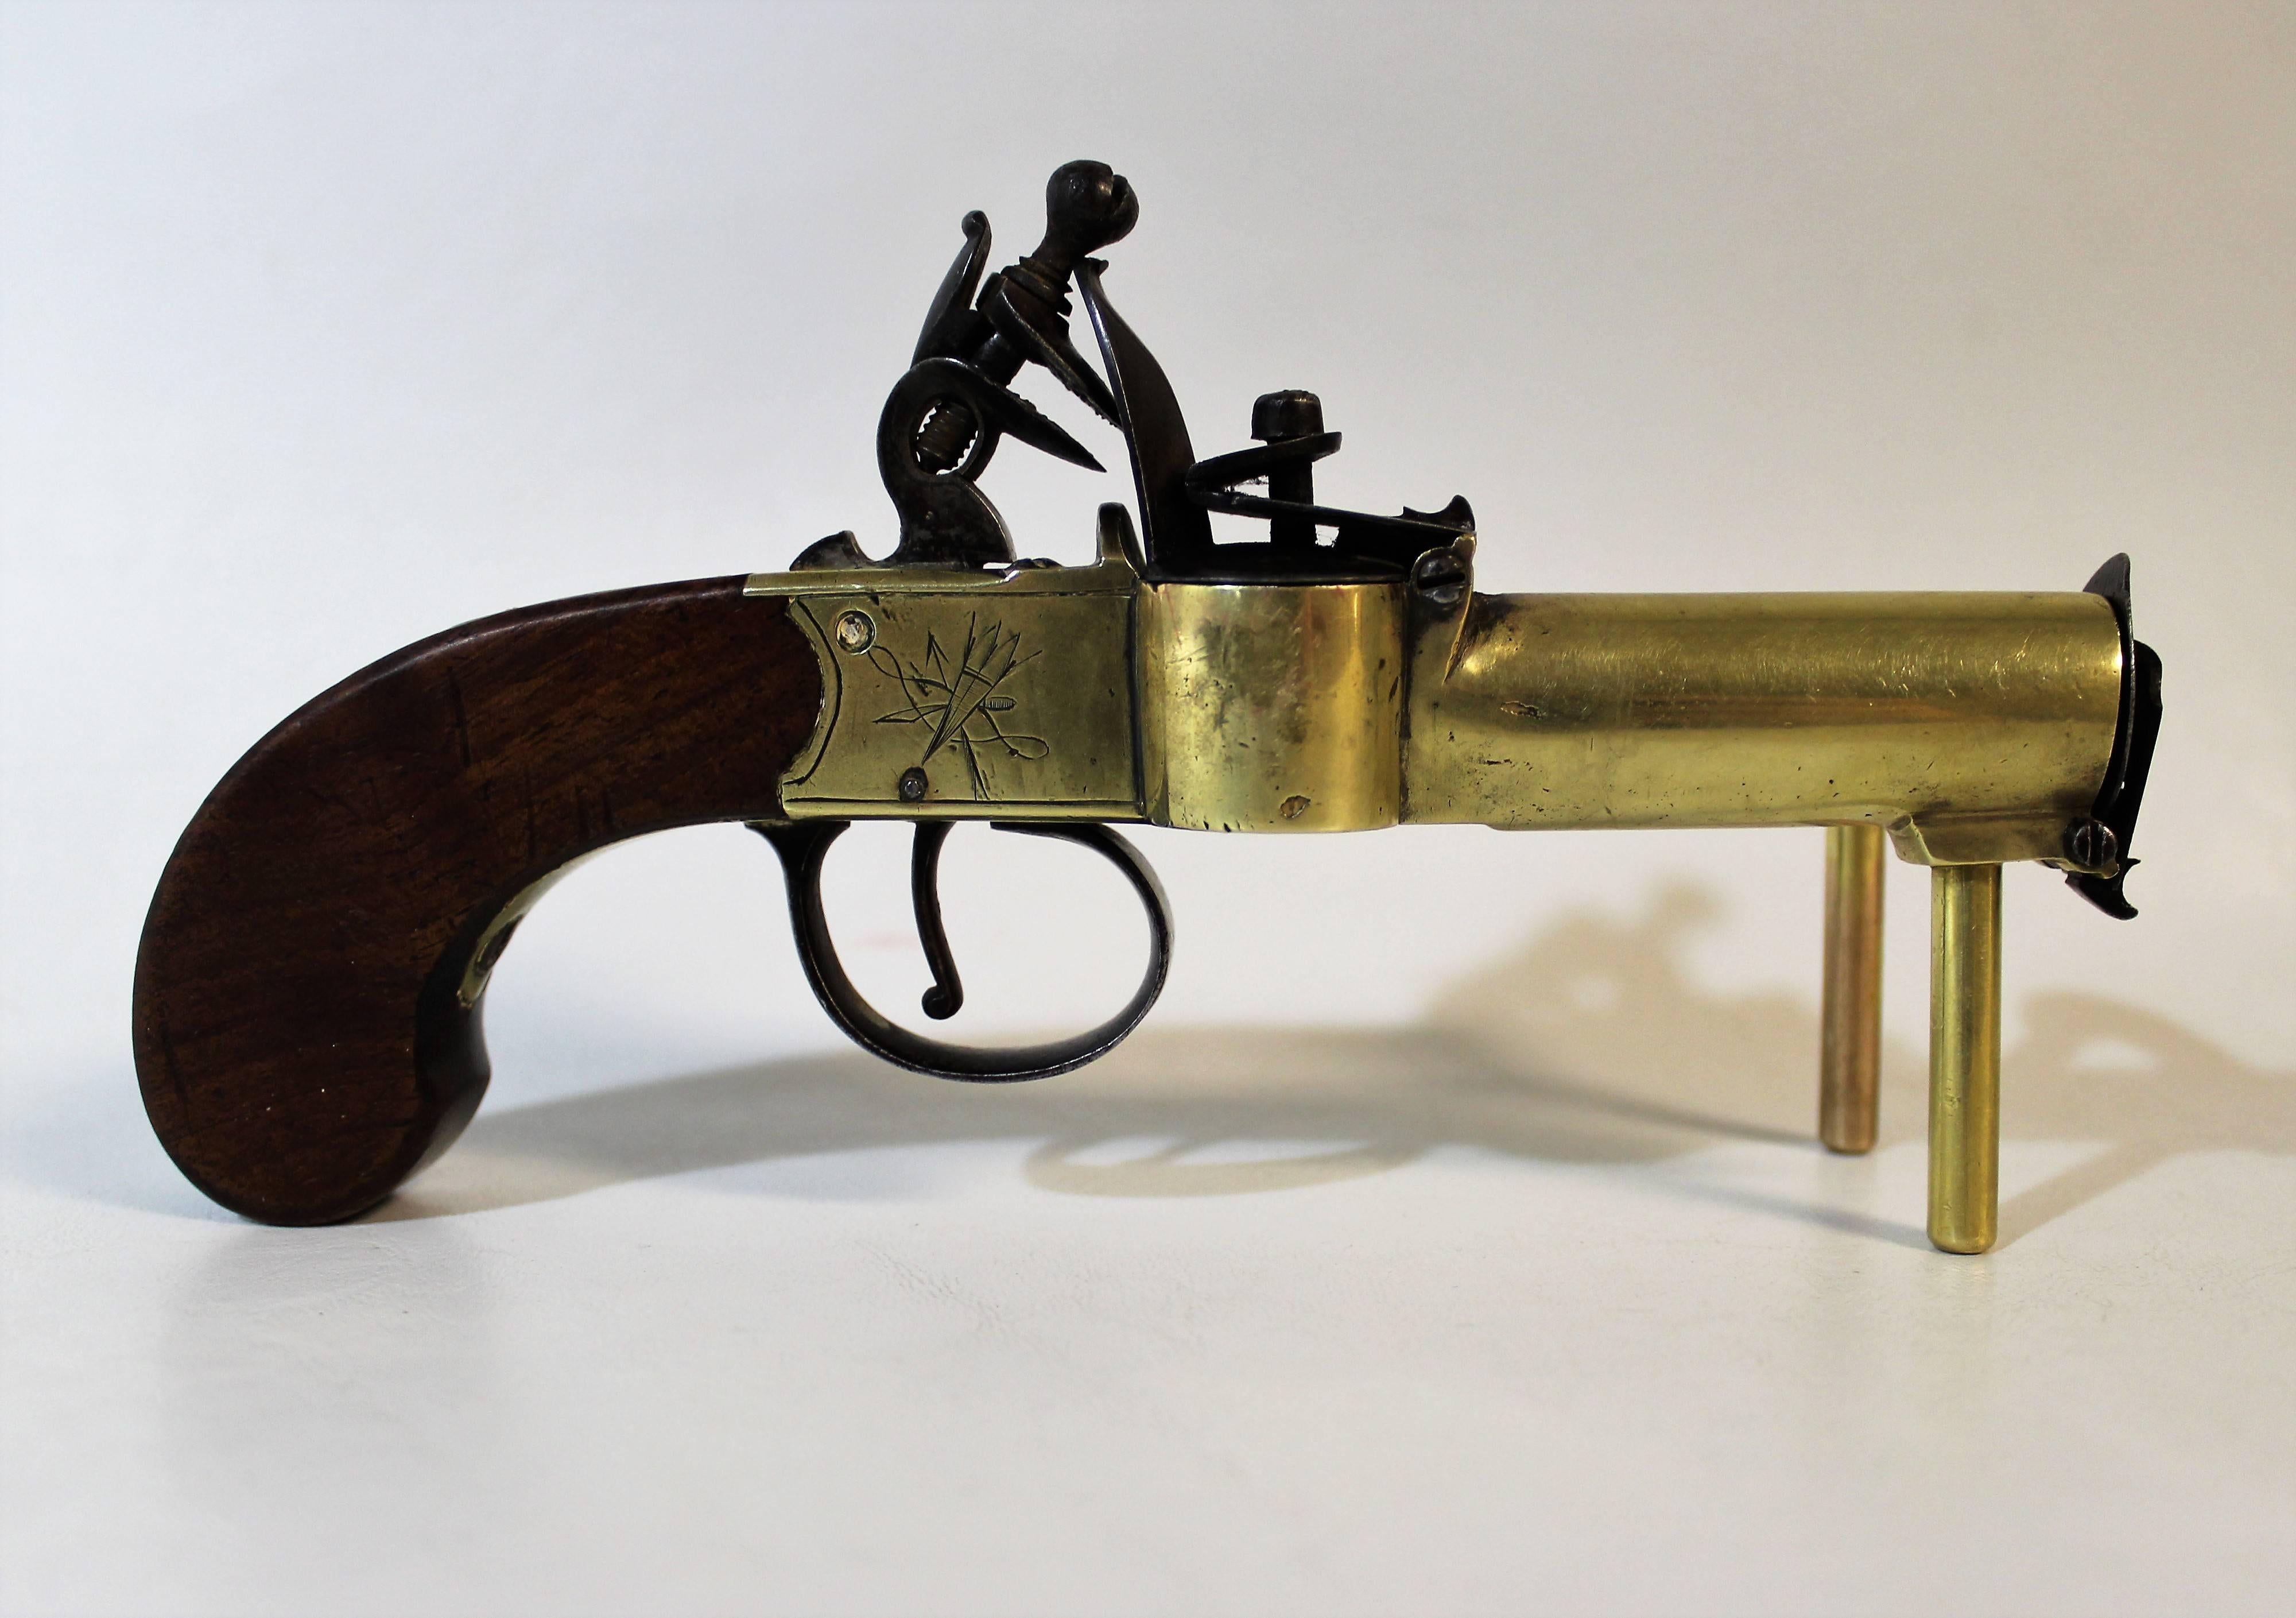 18th century, English brass framed and engraved tinder lighter in the form of a flintlock box-lock pocket pistol. The front of the lighter is hinged to contain tinder with a large central portion for ignition.
  